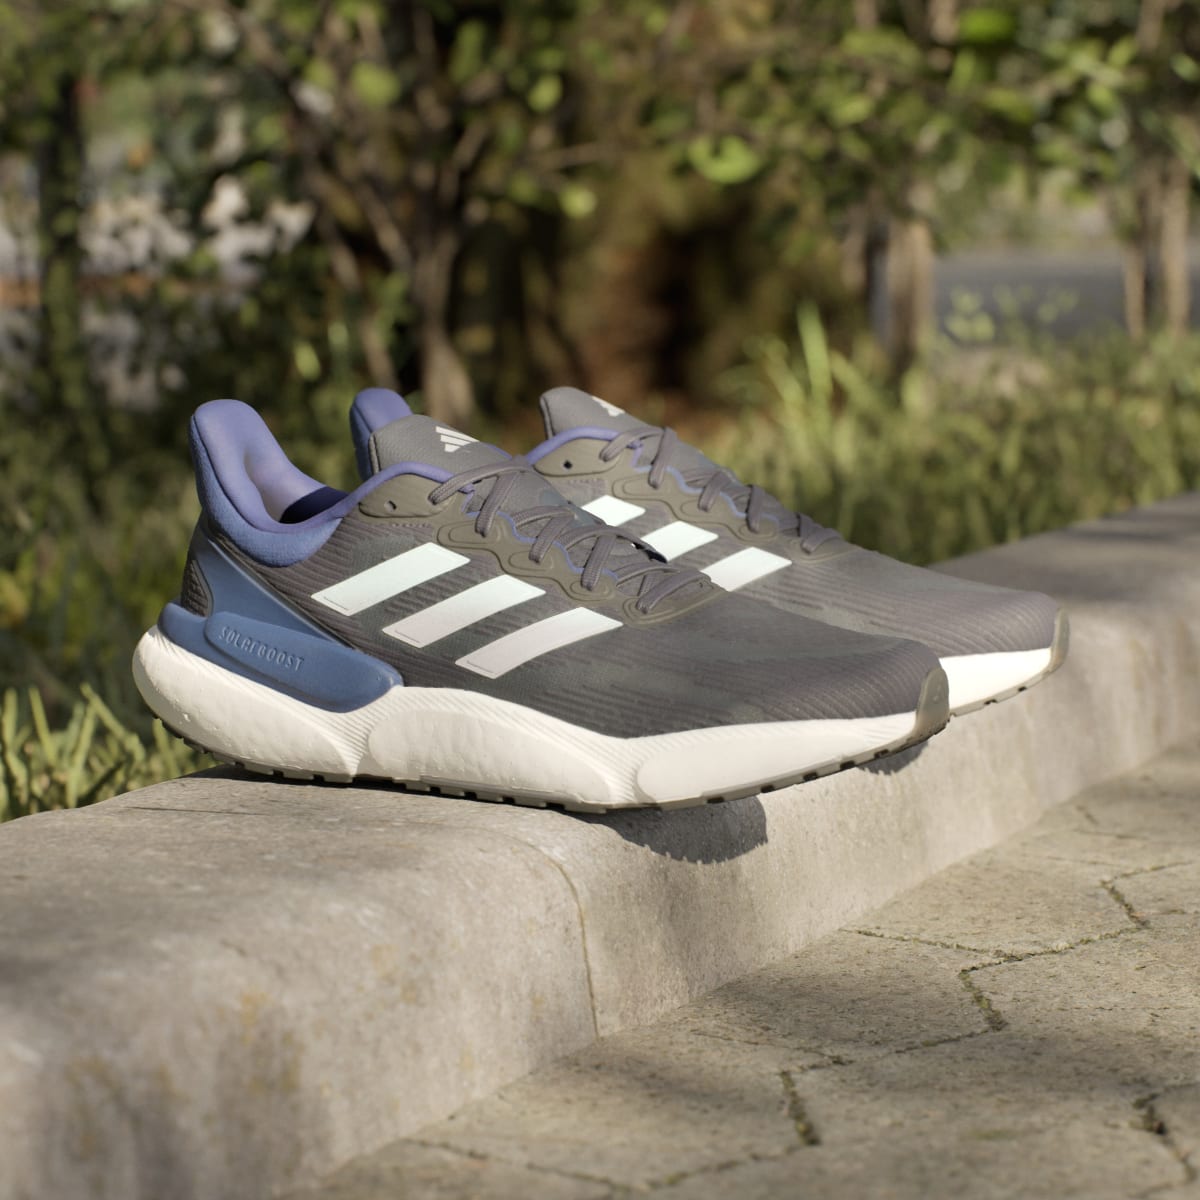 Adidas Solarboost 5 Shoes. 4